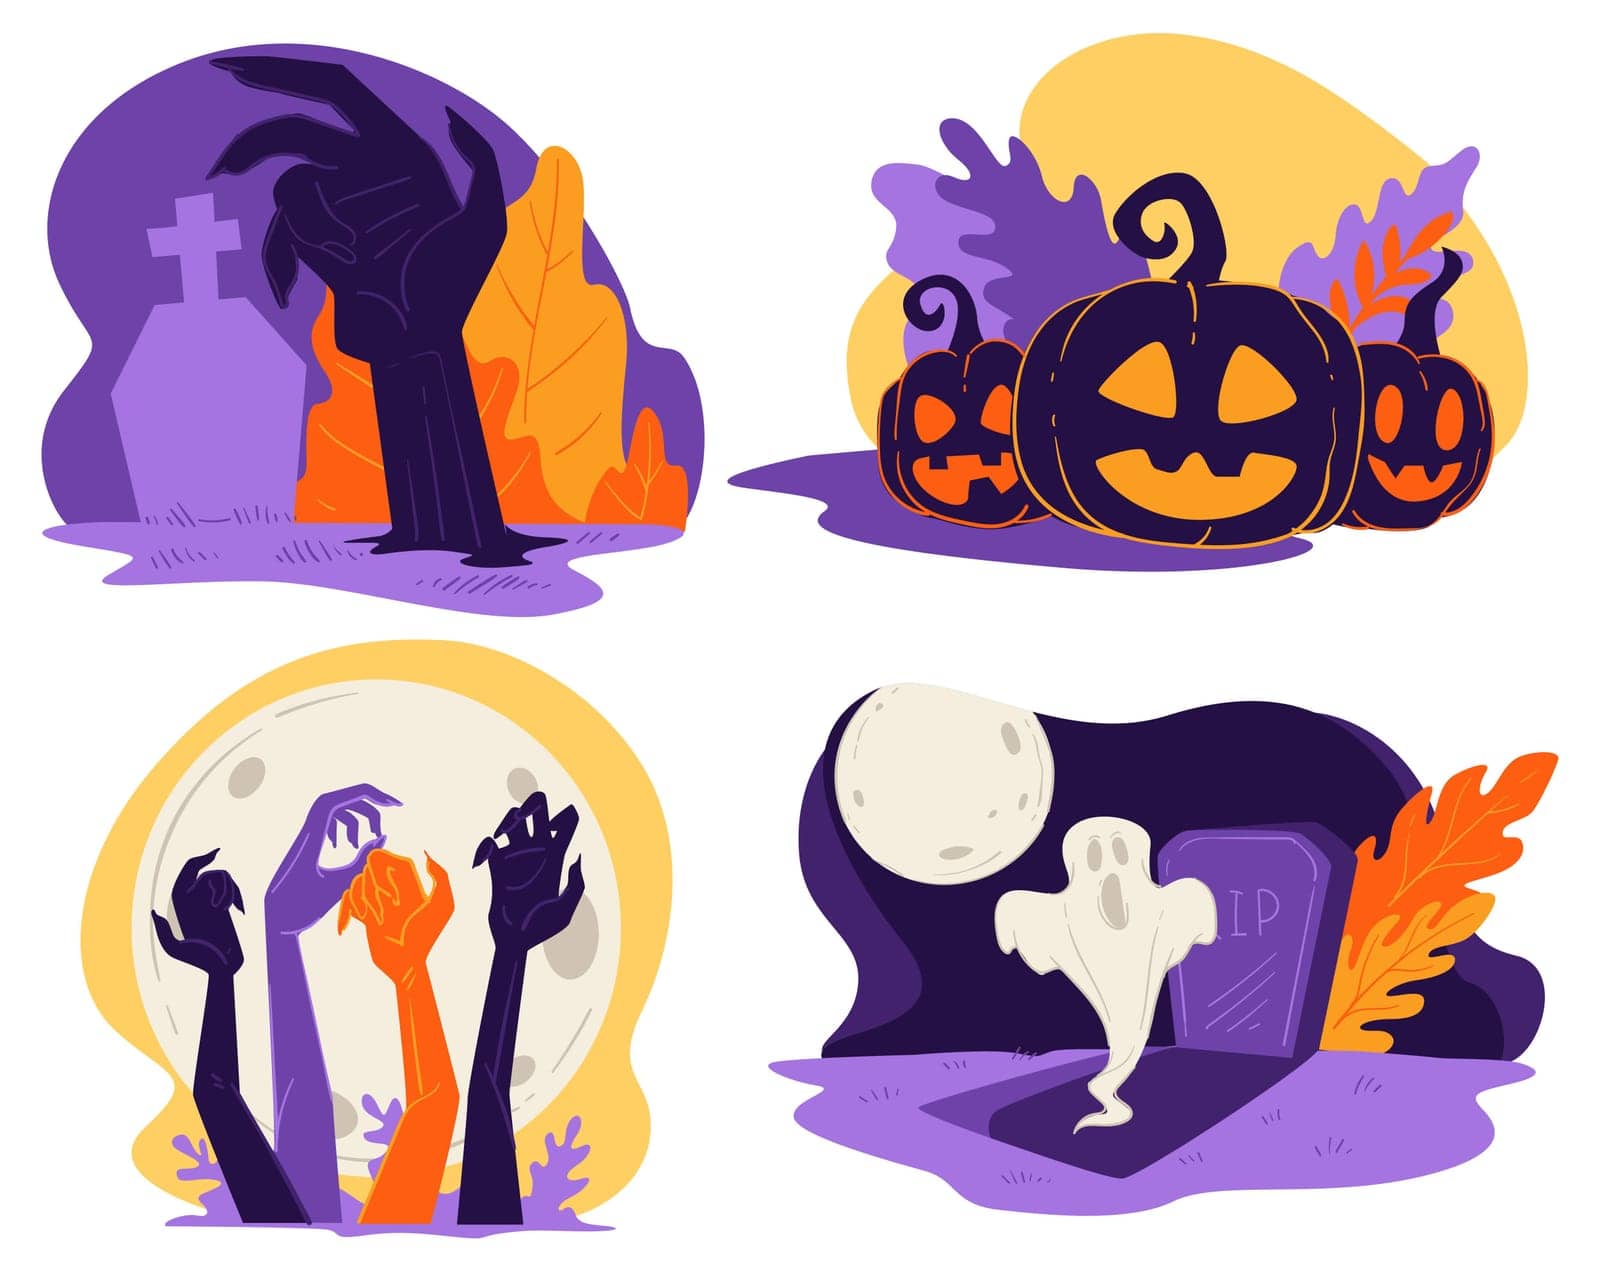 Autumn holiday celebration, halloween in fall season. Graveyard with zombie hand, rising from dead. Spooky ghost by tombstone under full moon, carved pumpkins with light inside. Vector in flat styles